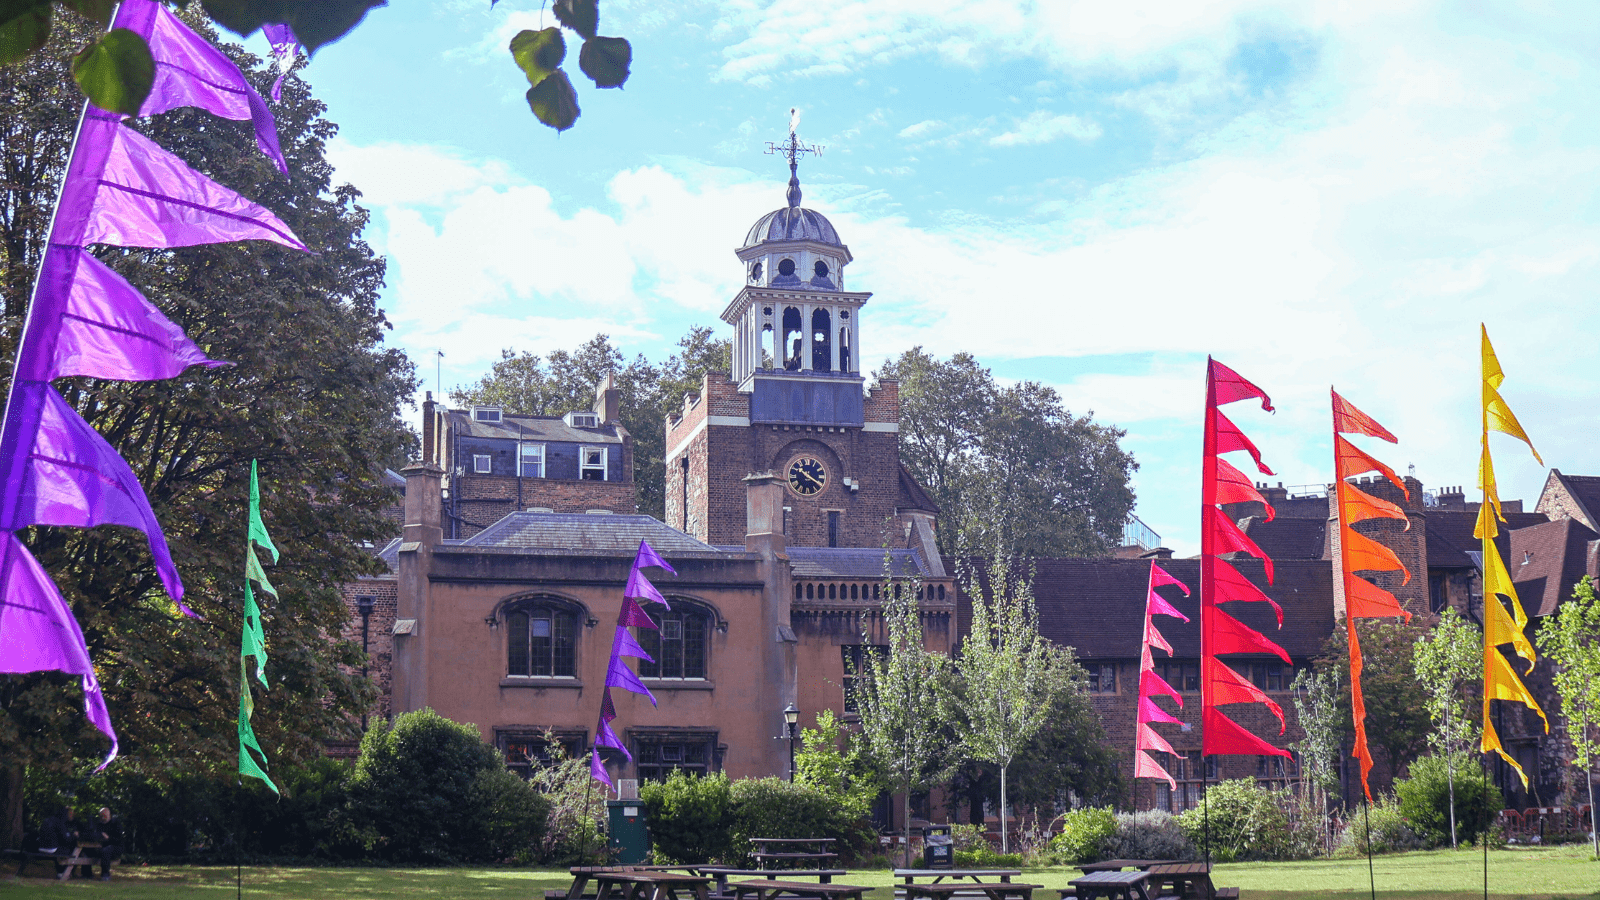 The view from the lawn at Charterhouse Square - image shows the Charterhouse surrounded by colourful banners